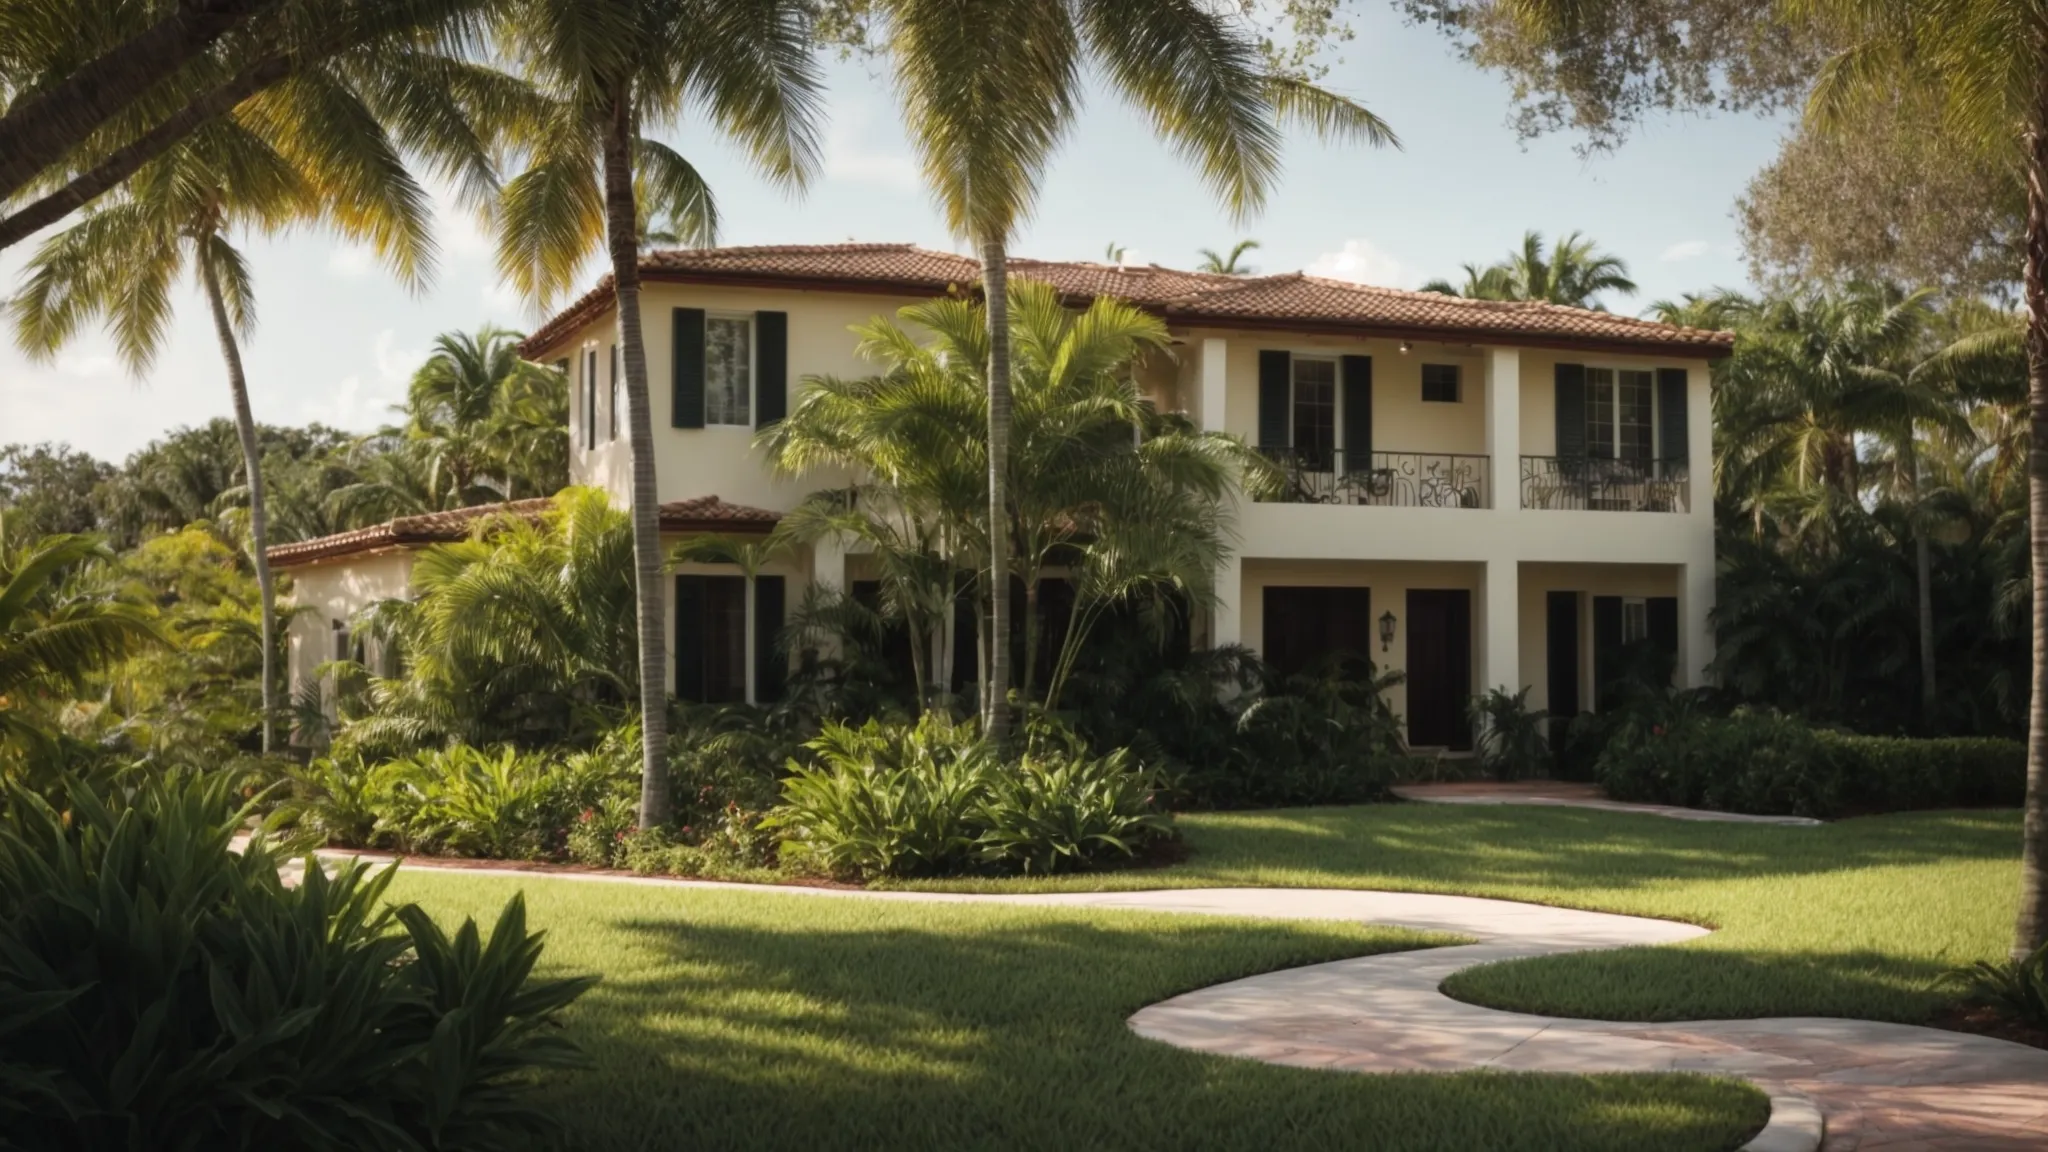 a well-maintained home facade gleaming under the florida sun, surrounded by lush greenery.